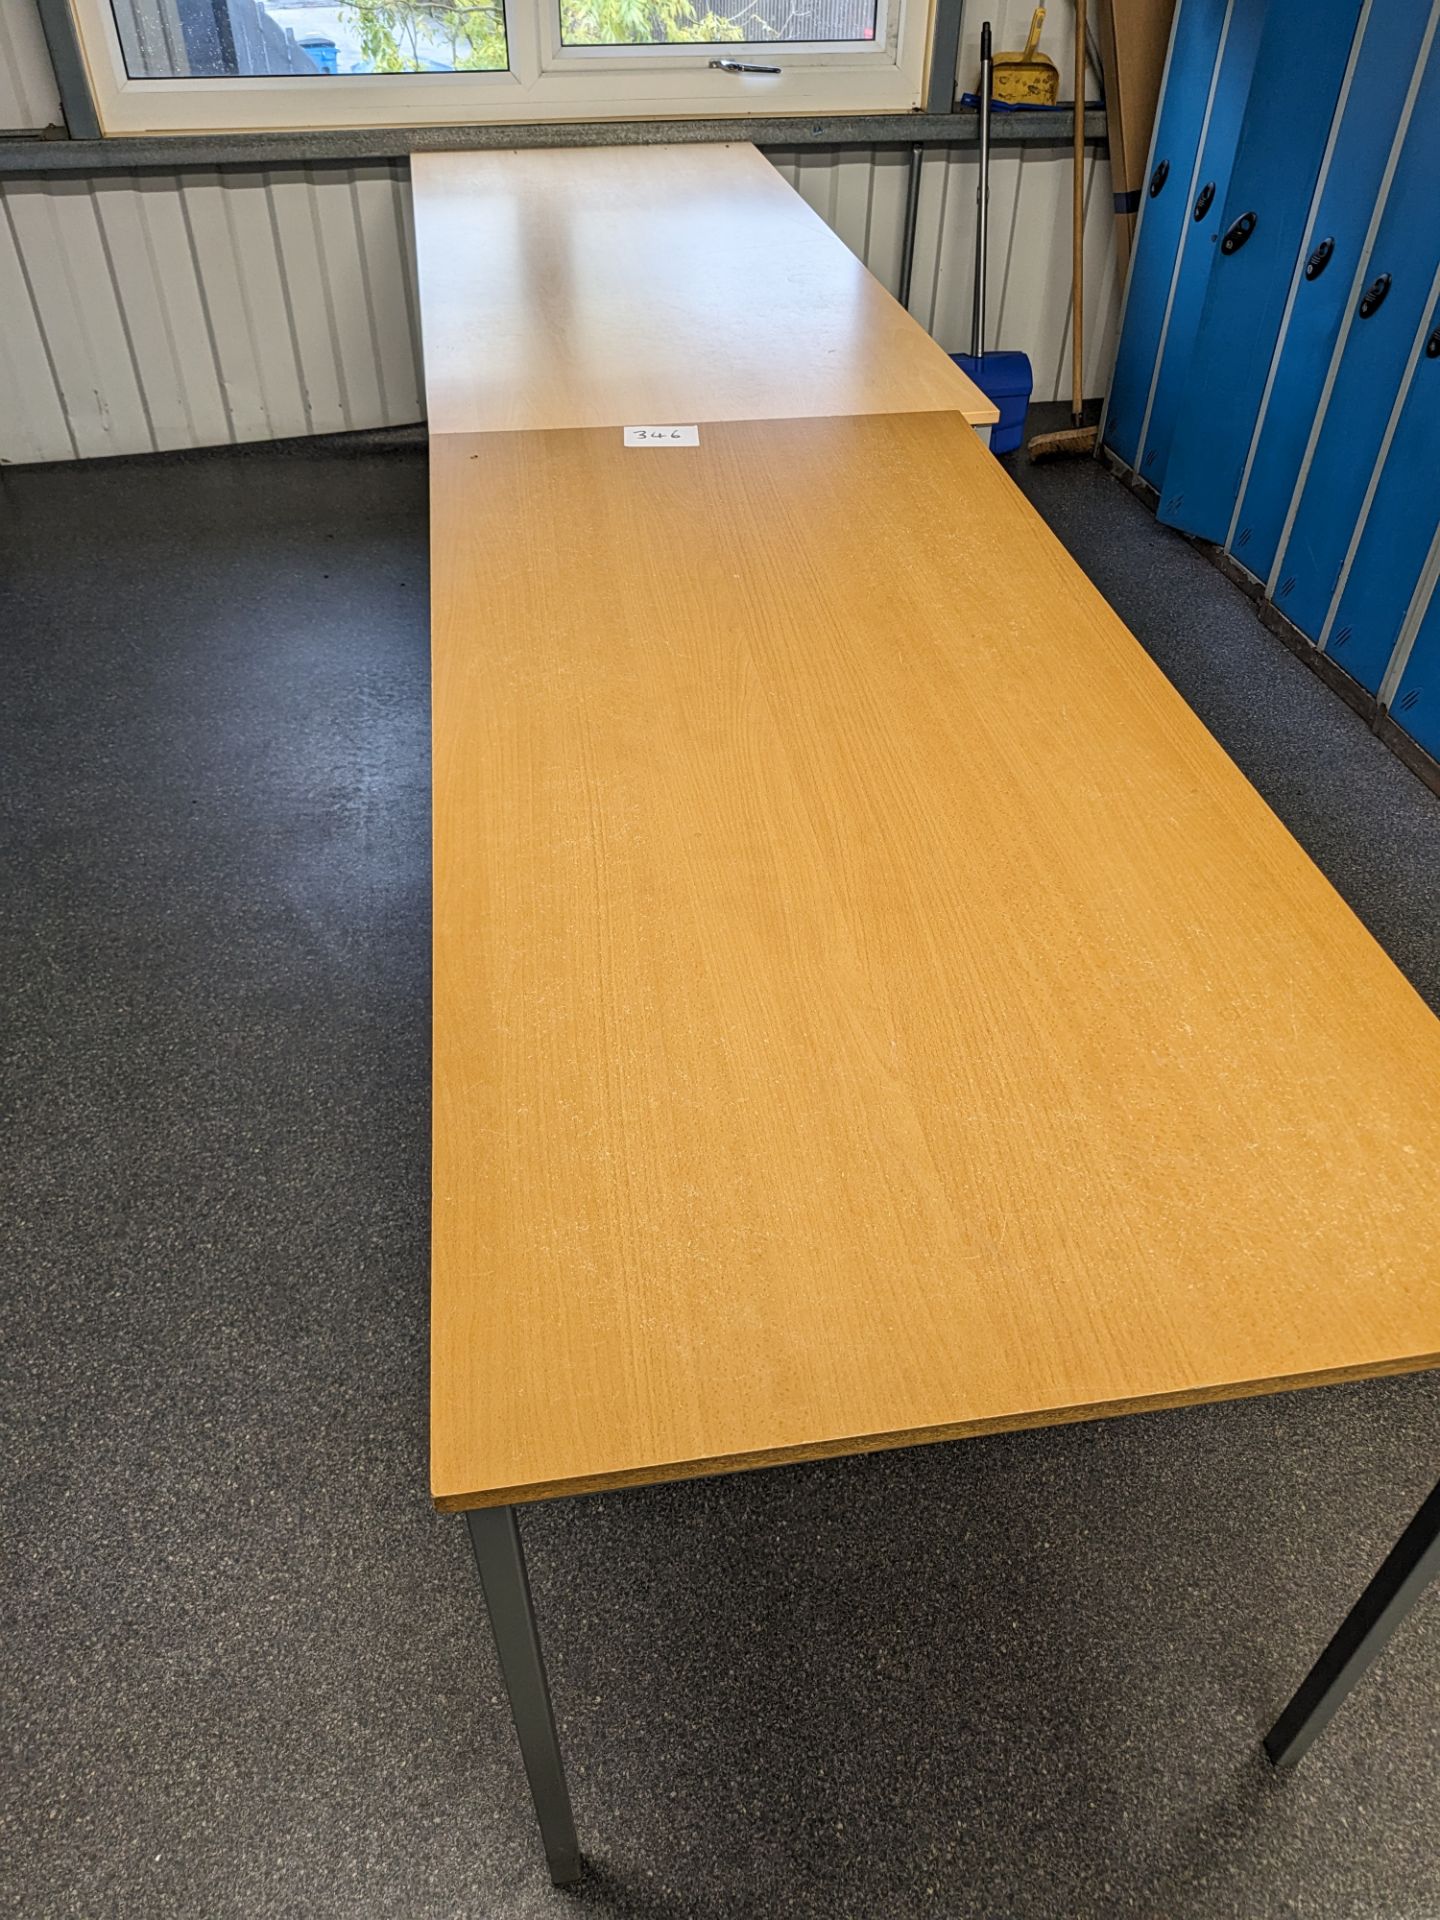 4: Steel framed Tables (Located on First Floor)